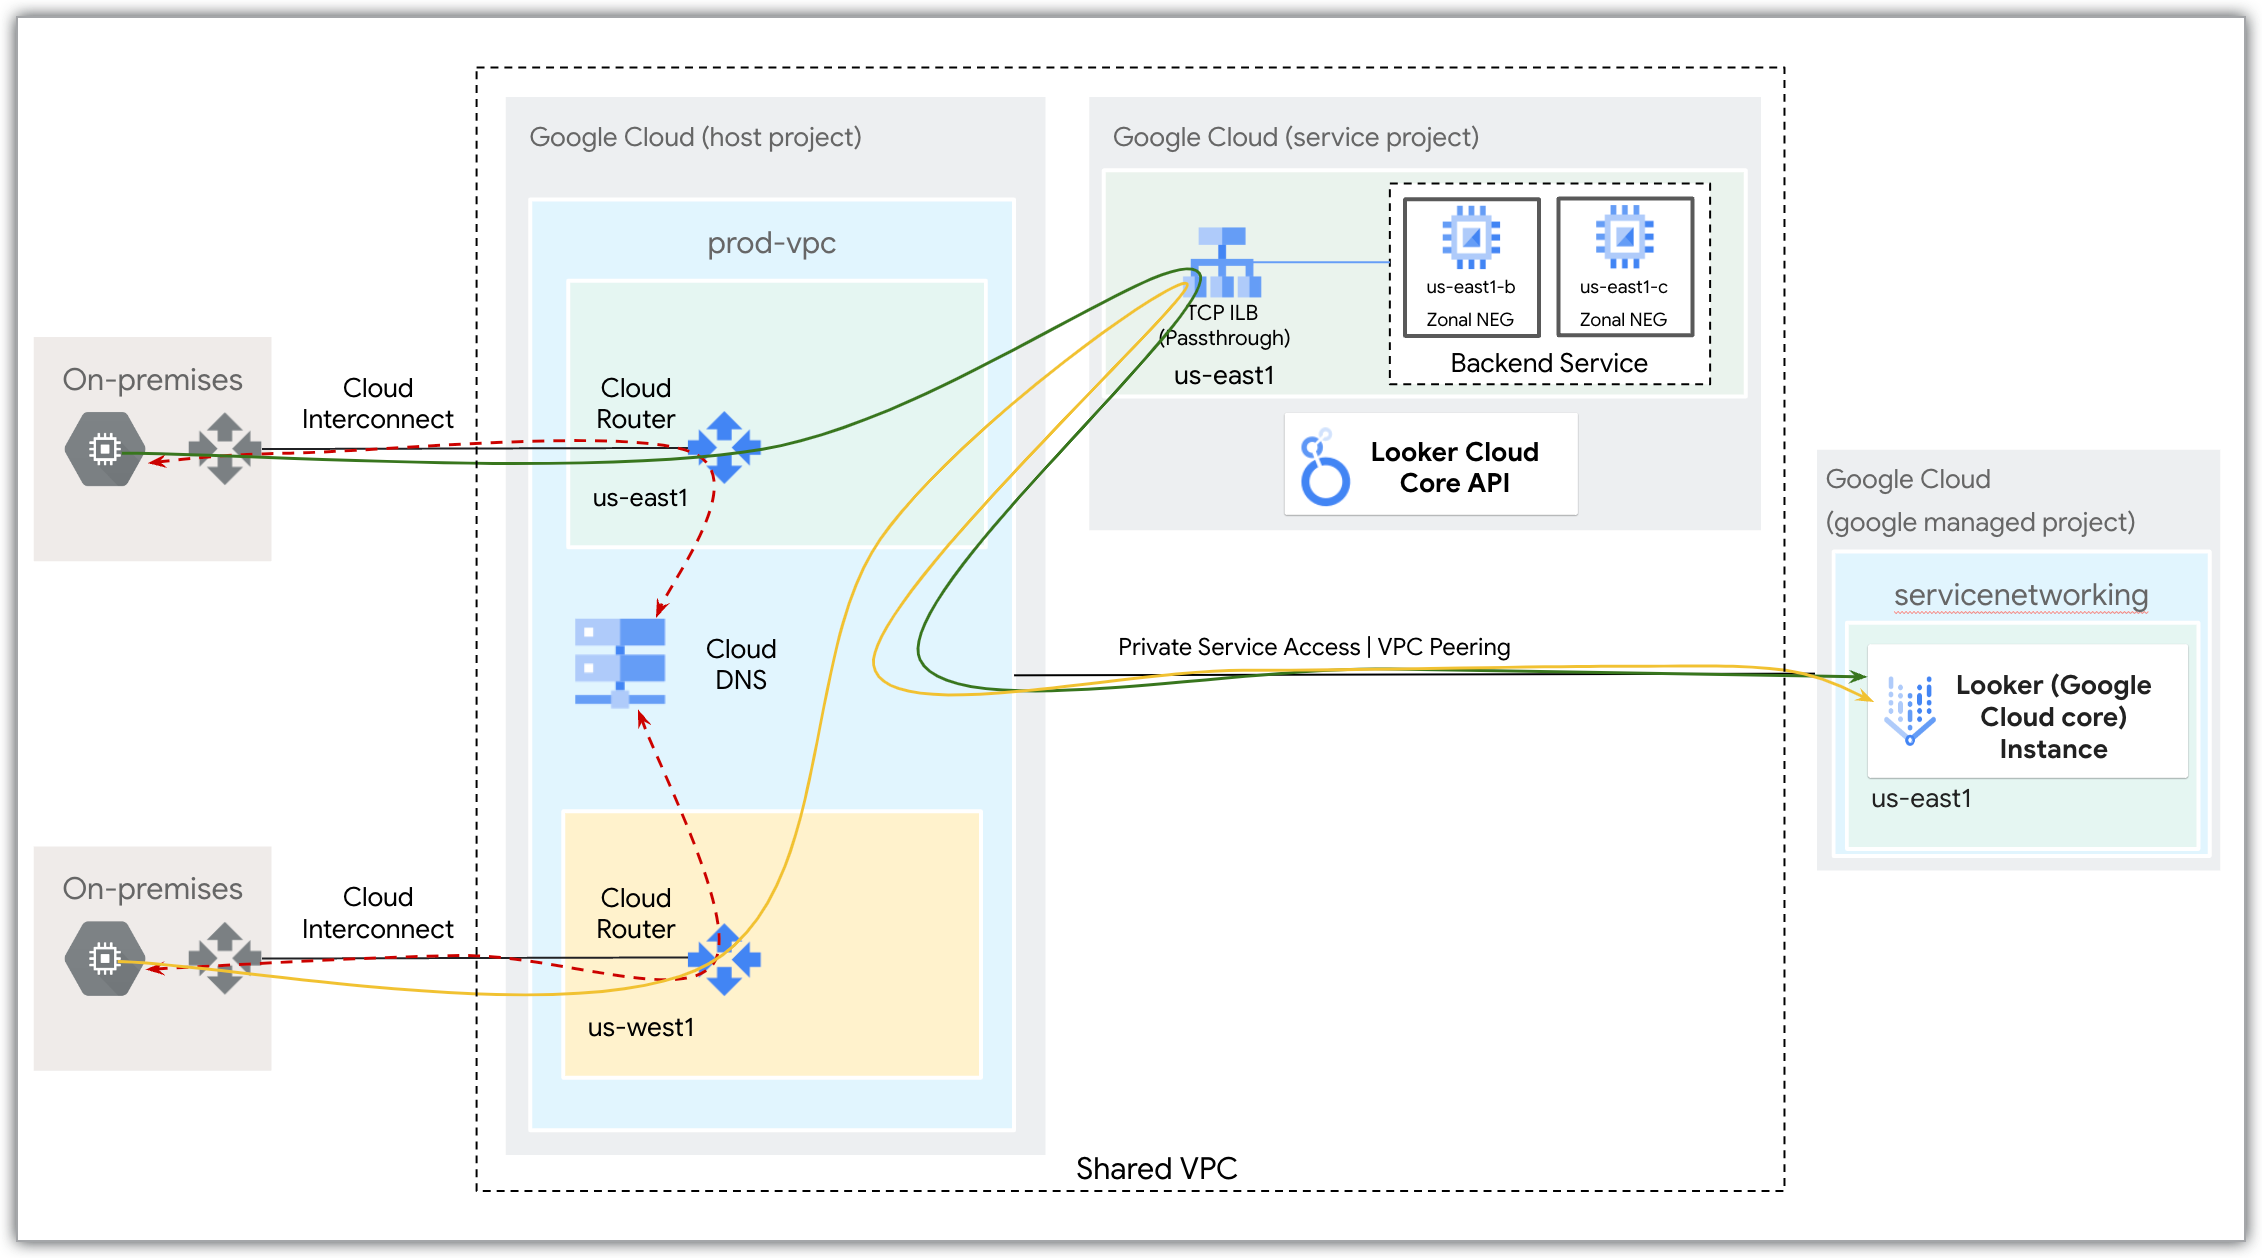 A Google Cloud network showing secure access to a Looker (Google Cloud core) instance using Cloud Router, an internal load balancer, and Private Services Access.